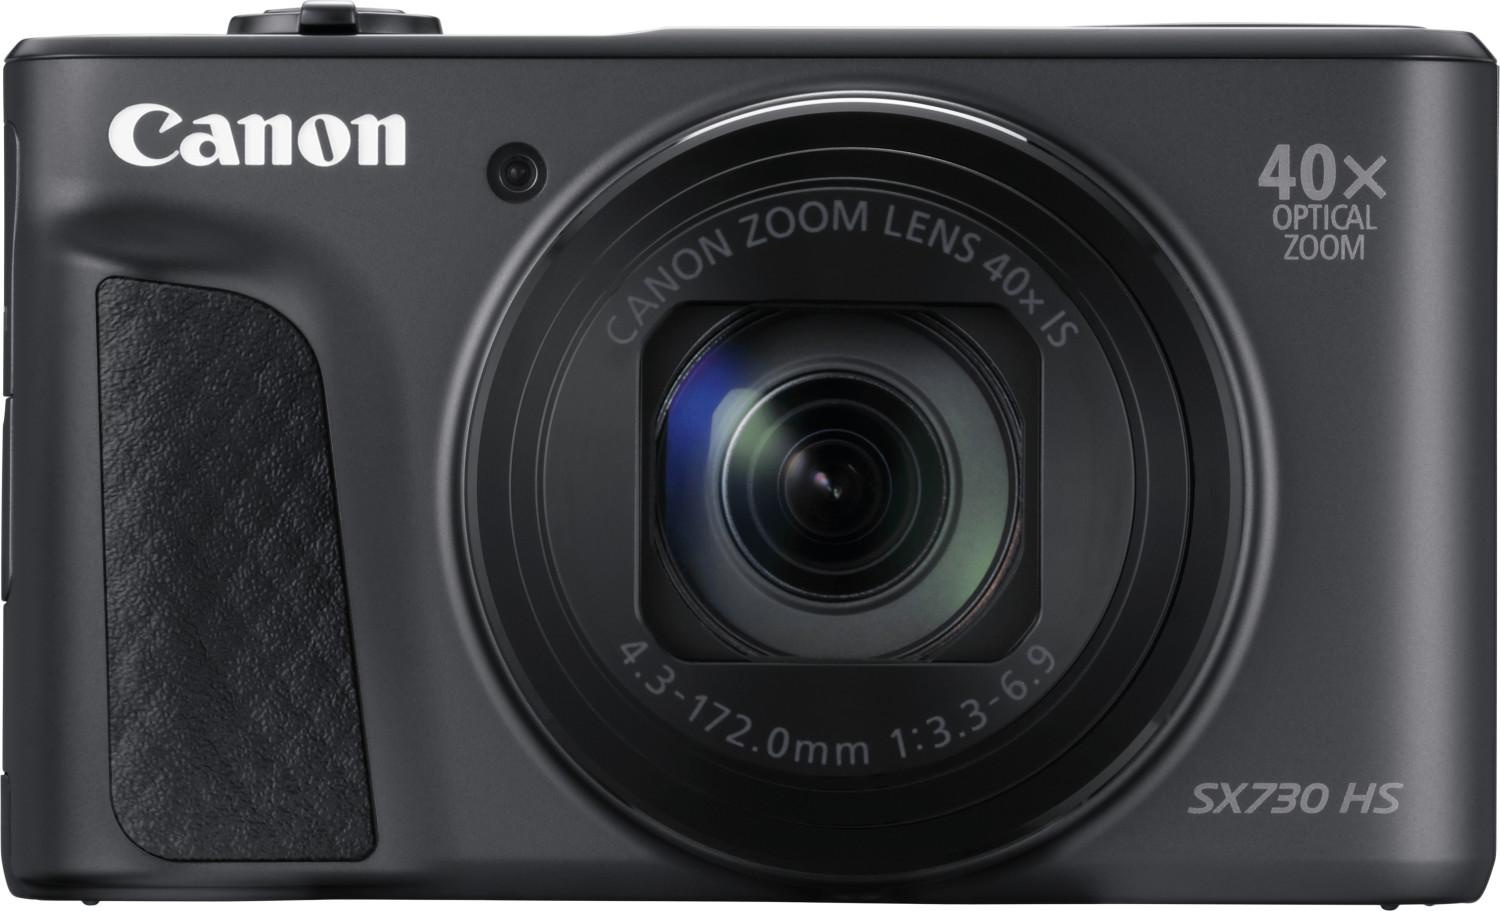 Buy Canon PowerShot SX730 HS from £319.00 (Today) – Best Deals on